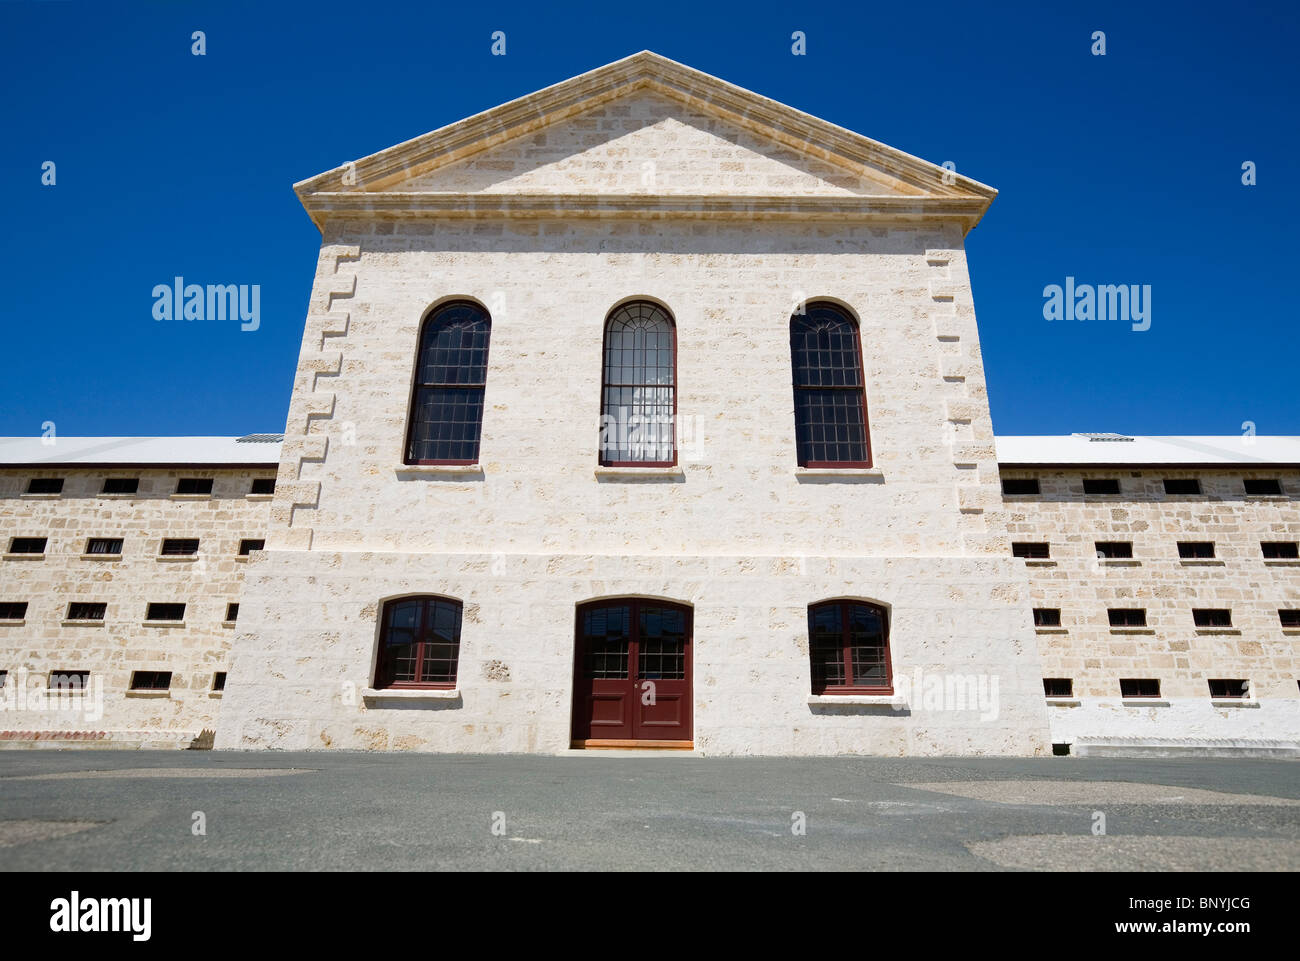 The Old Fremantle Prison, built by convict labour the prison operated from 1855 to 1991. Fremantle, Western Australia, AUSTRALIA Stock Photo